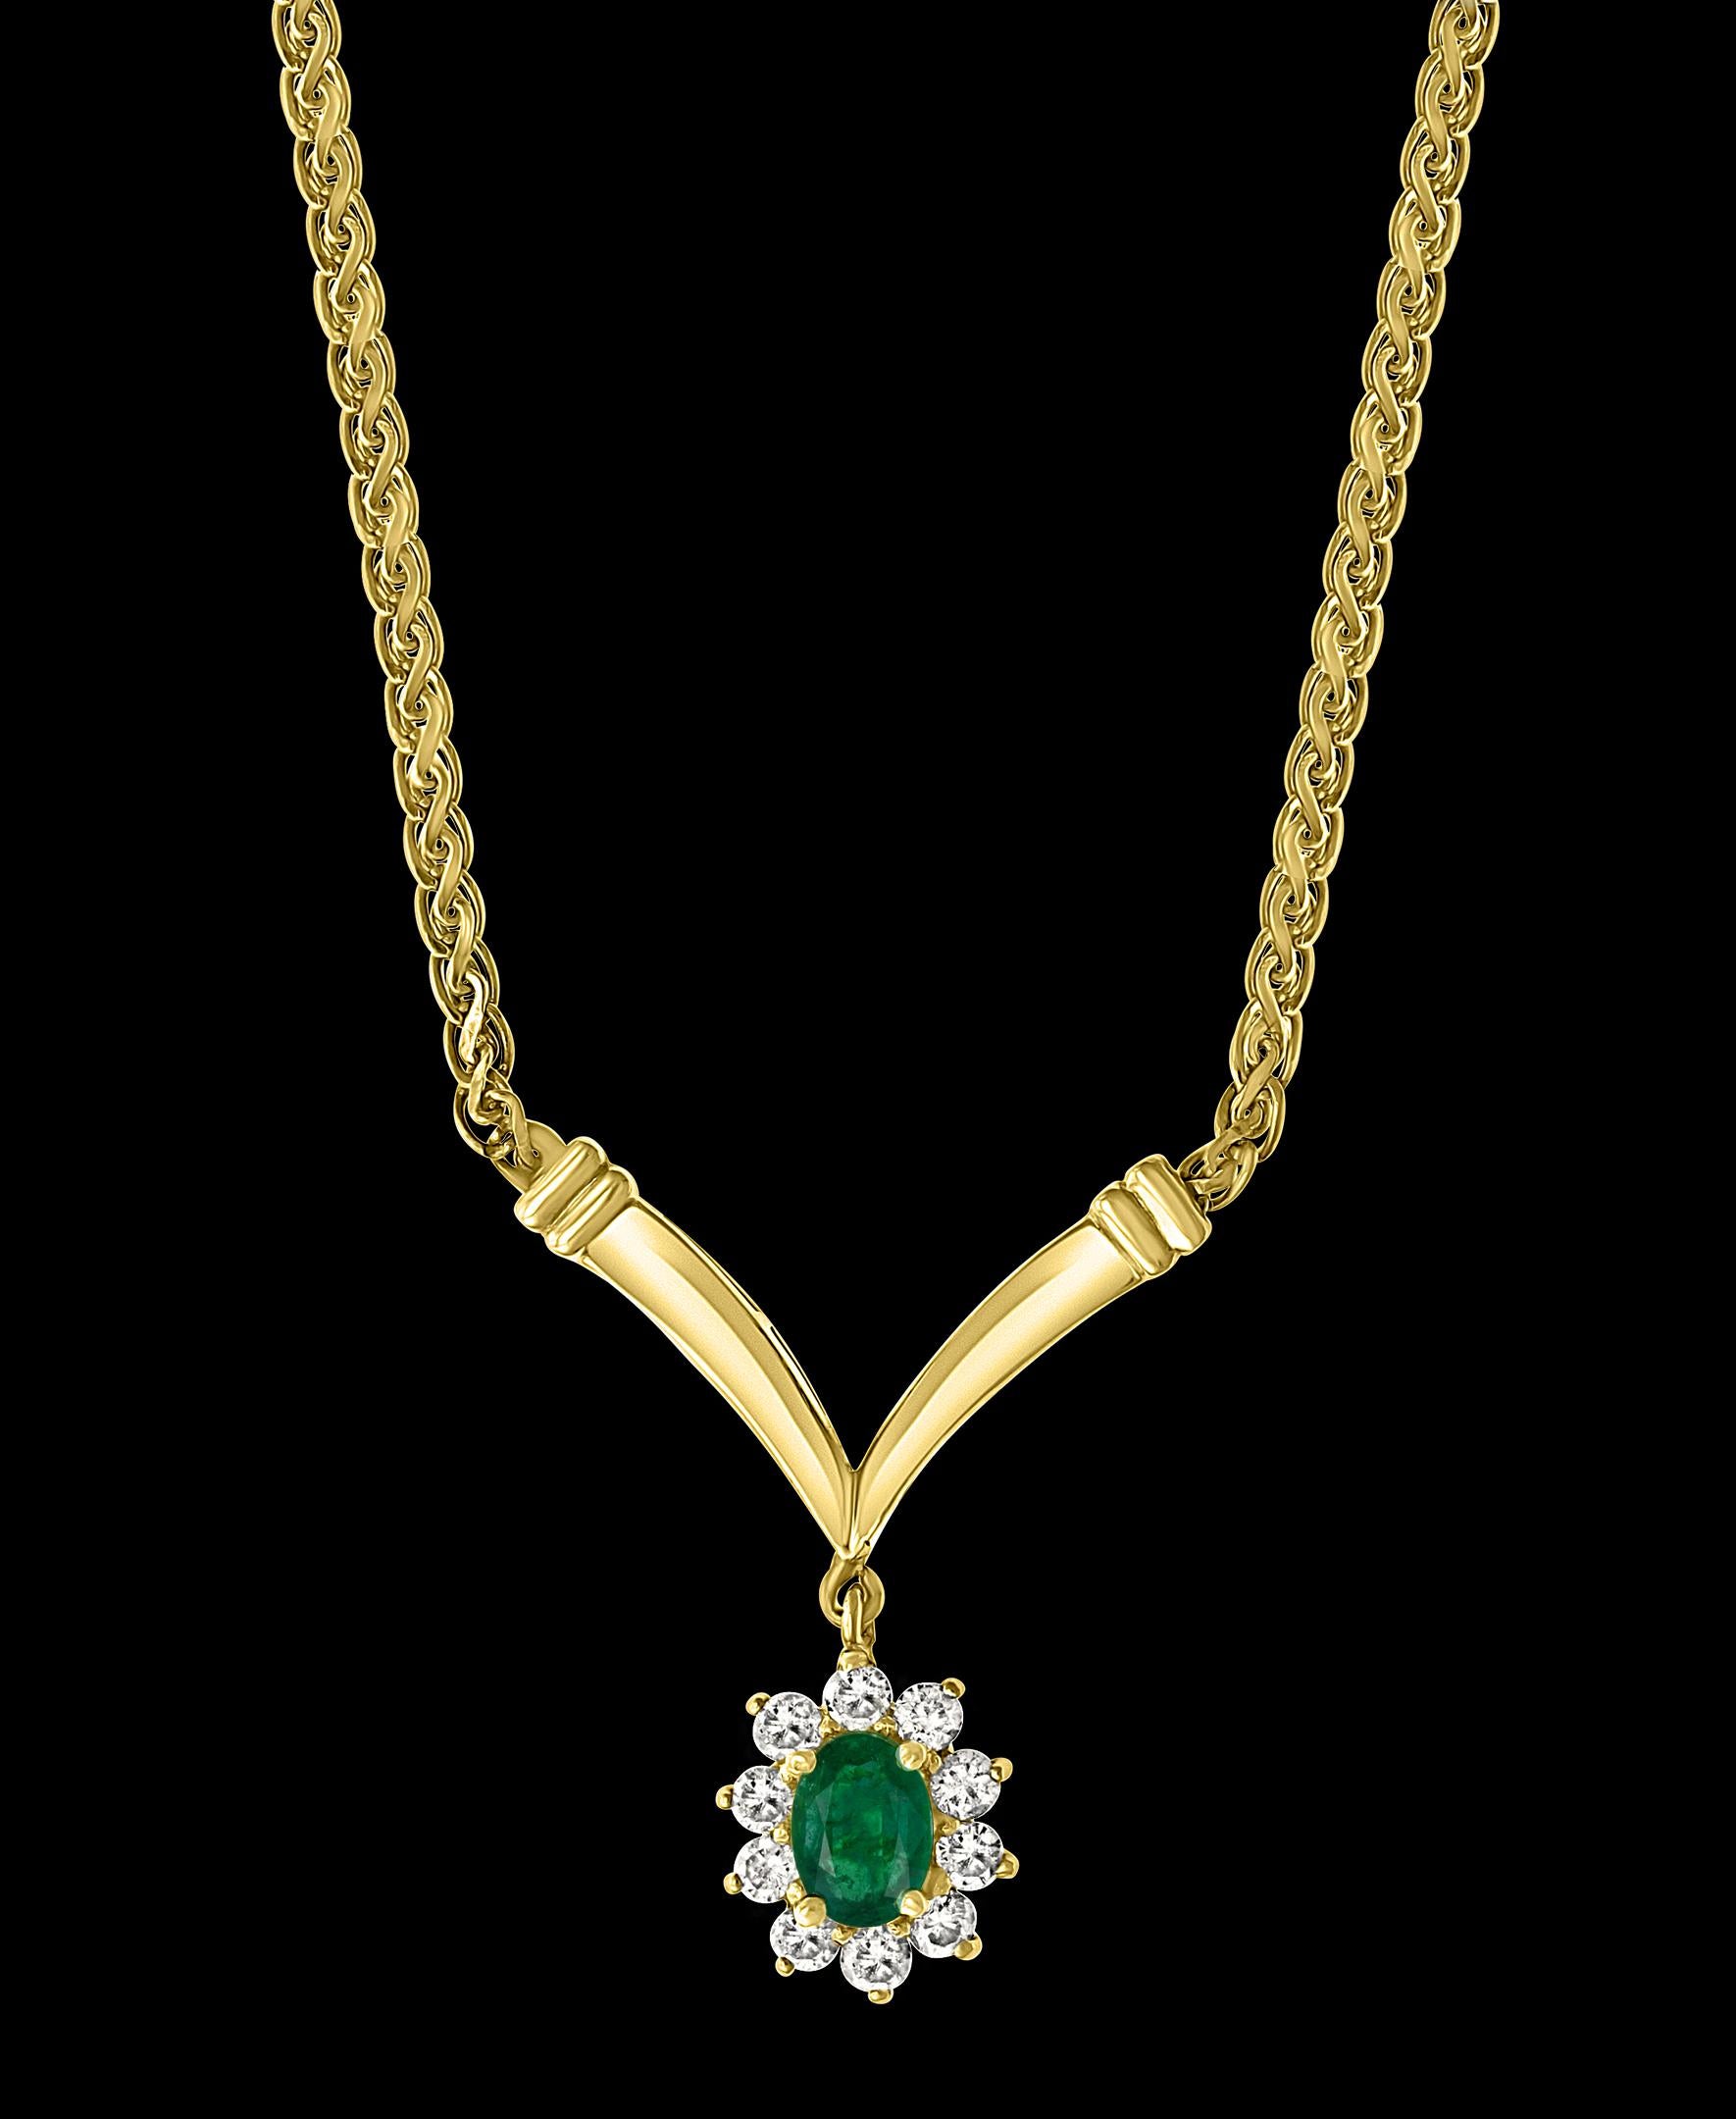 Approximately 1.2 Carat Oval Shape Emerald & .5 Carat Diamond Necklace in 14 Karat Yellow Gold
This Simple yet elegant Necklace  consisting of a single oval shape emerald surrounding by brilliant cut round diamonds with a solid 14 Karat yellow gold